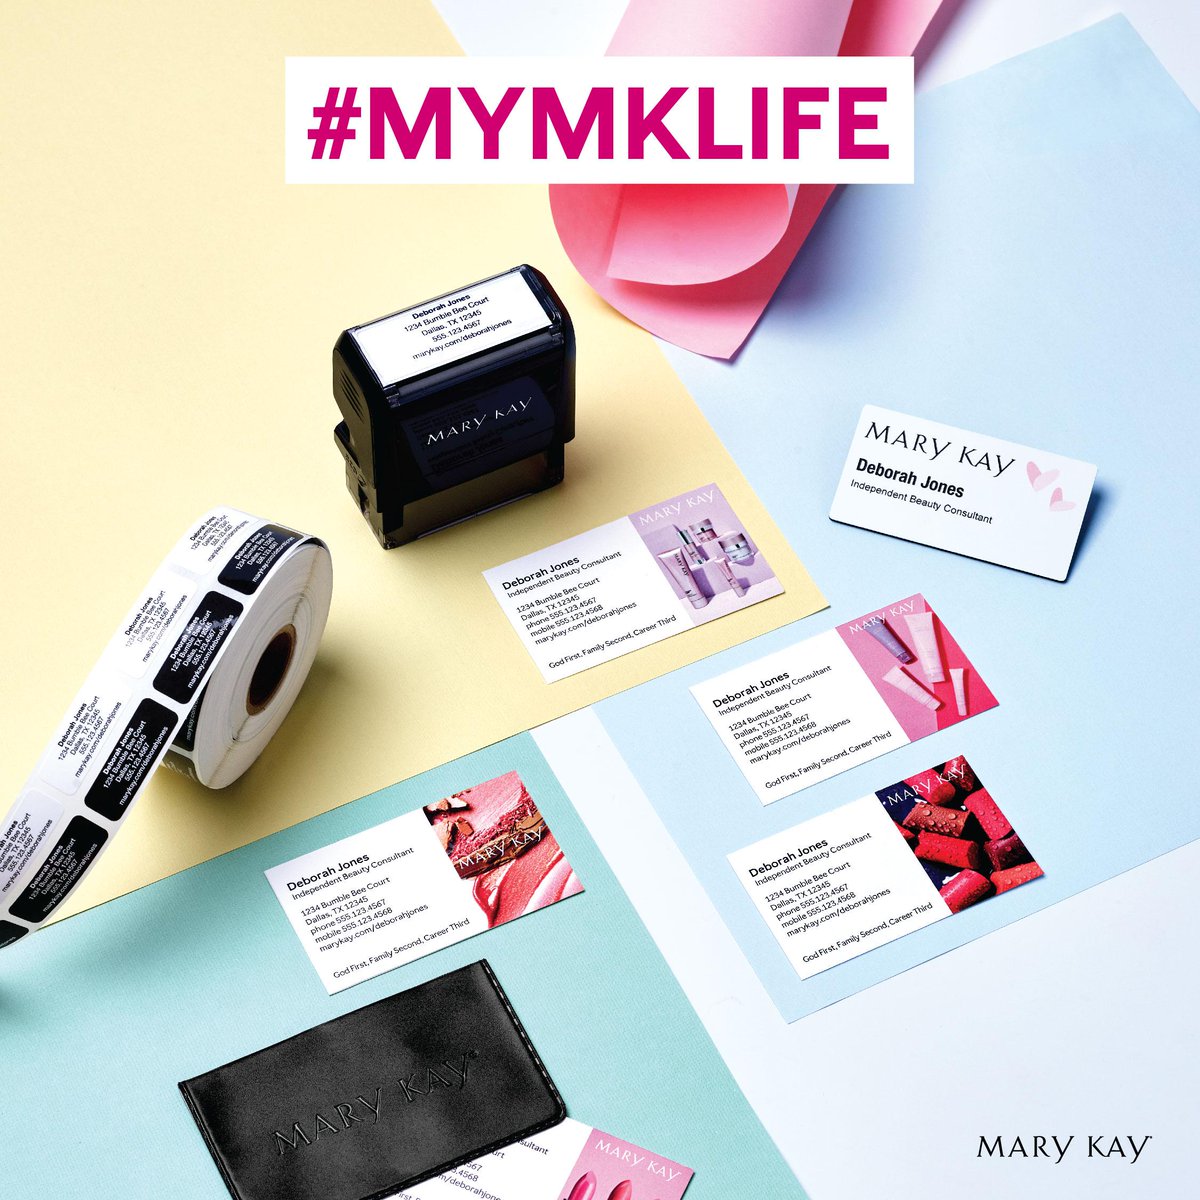 🎊I love that my Mary Kay business allows me to be my own boss! I get to work as much or as little as I want while being supported by a Company whose mission is to enrich women's lives!
#MyMKLife